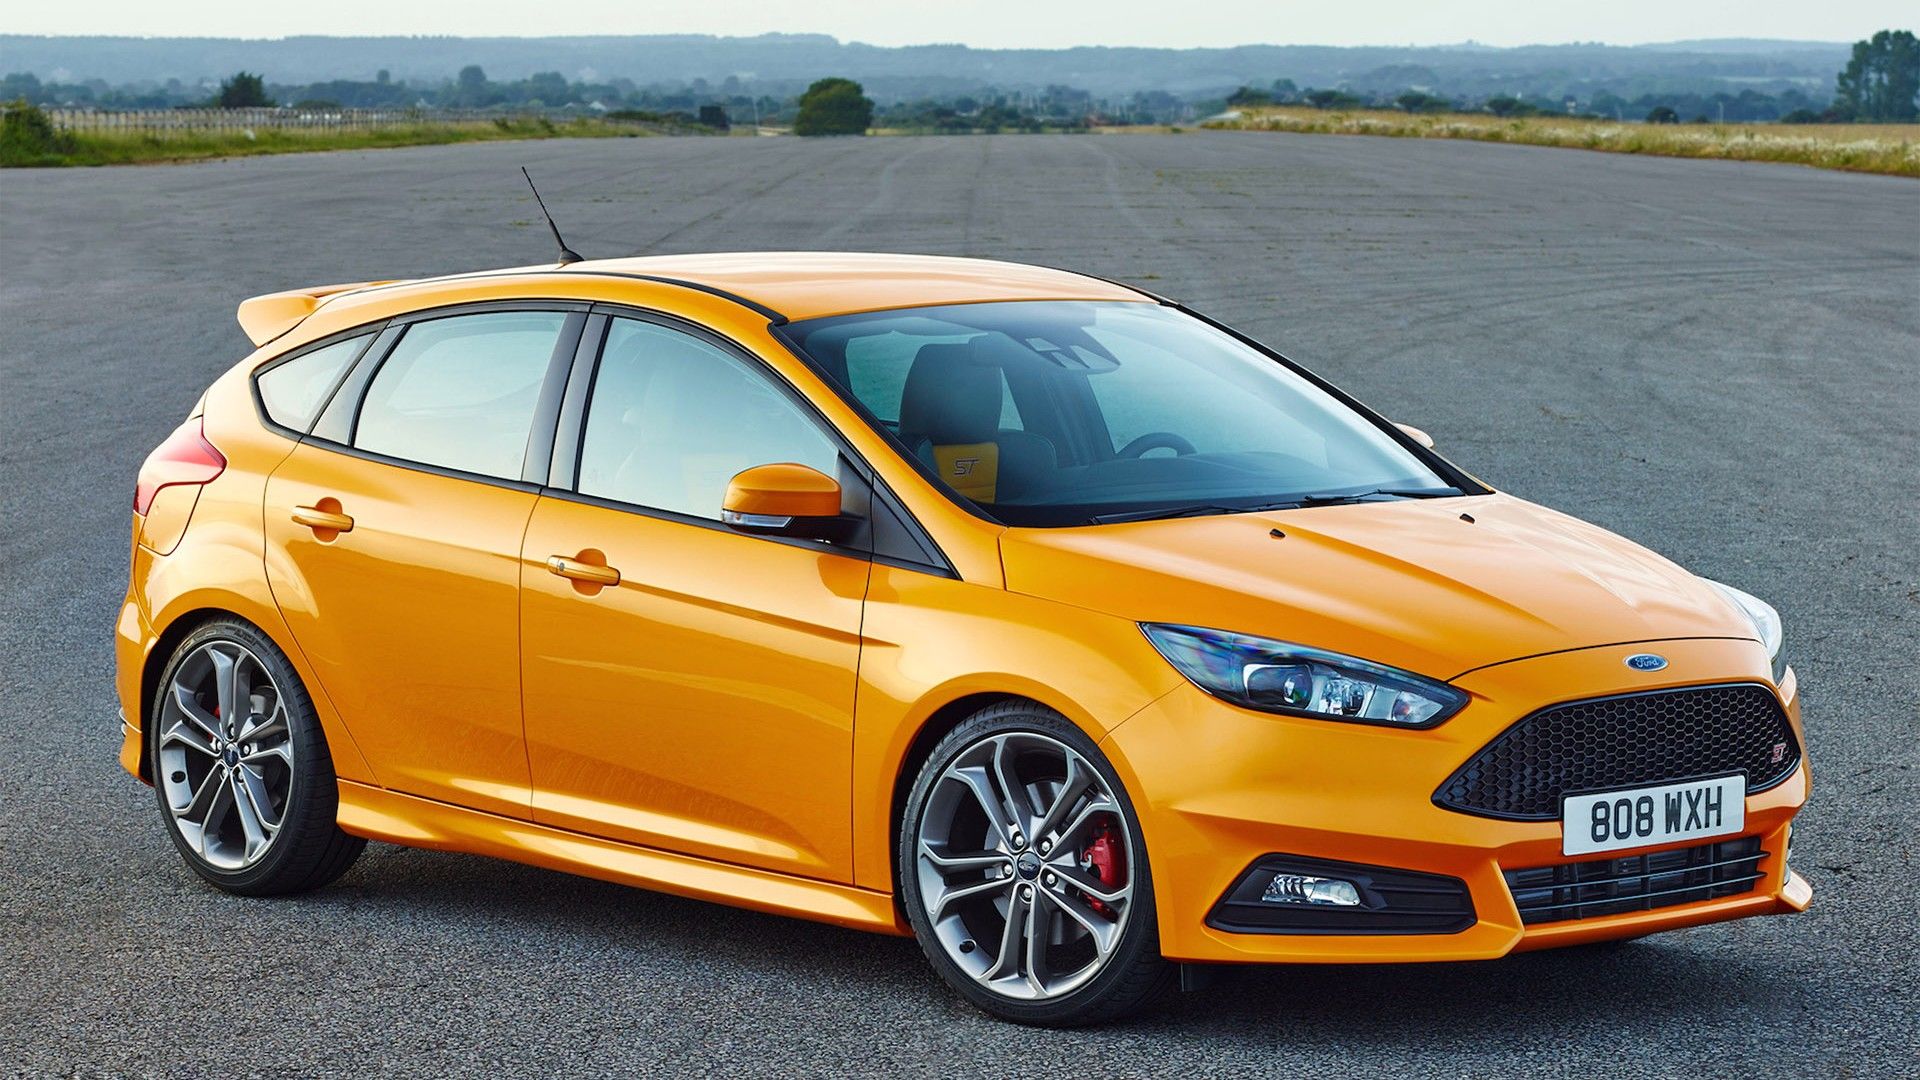 2016-Ford-Focus-ST-Photo-High-Resolution